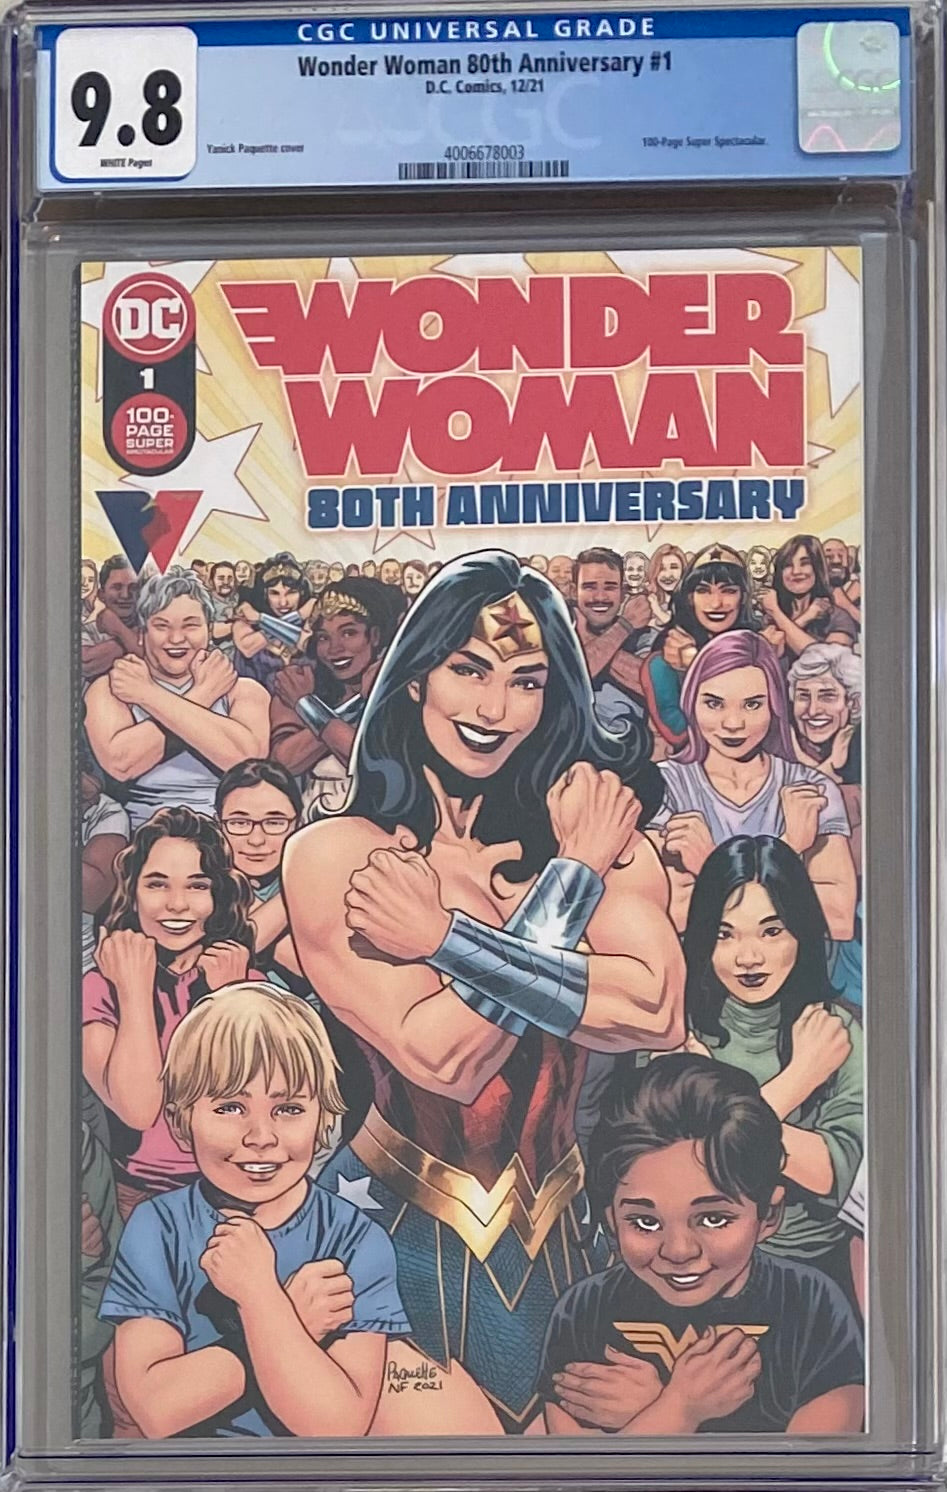 Wonder Woman 80th Anniversary 100 Page Super Spectacular #1 CGC 9.8